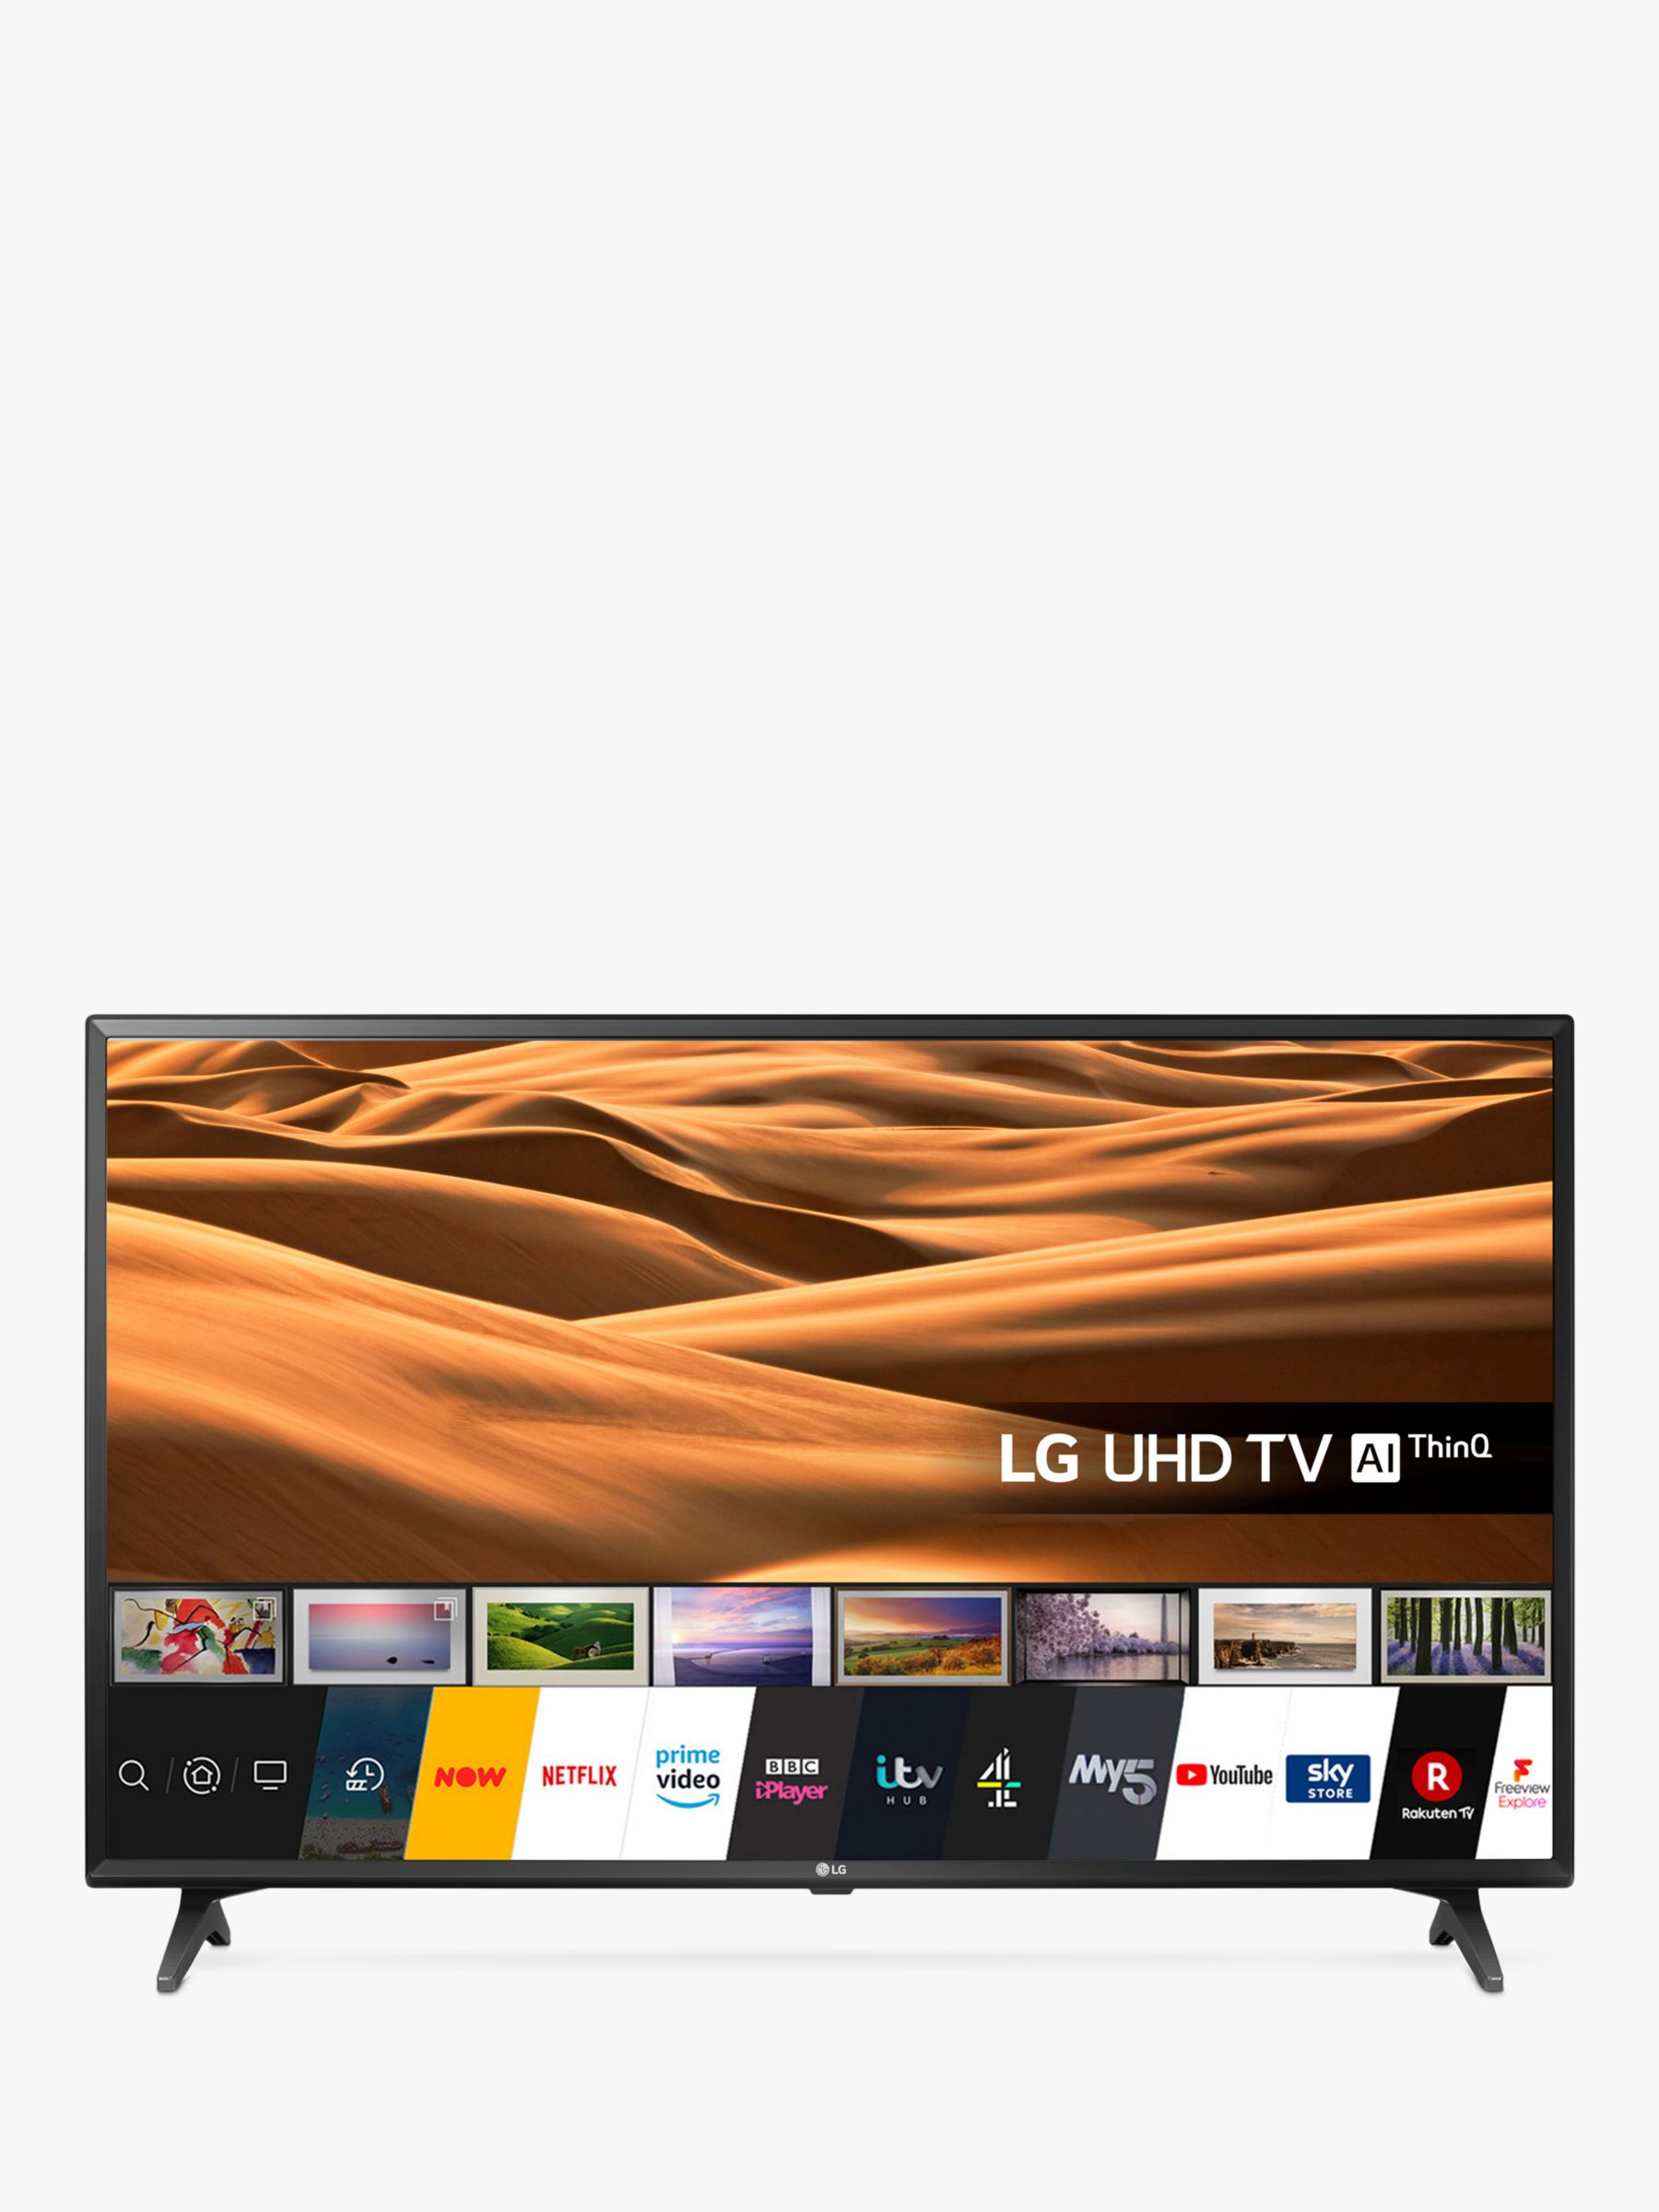 LG 43UM7050PLF (2020) LED HDR 4K Ultra HD Smart TV, 43 inch with Freeview Play/Freesat HD, Ceramic Black